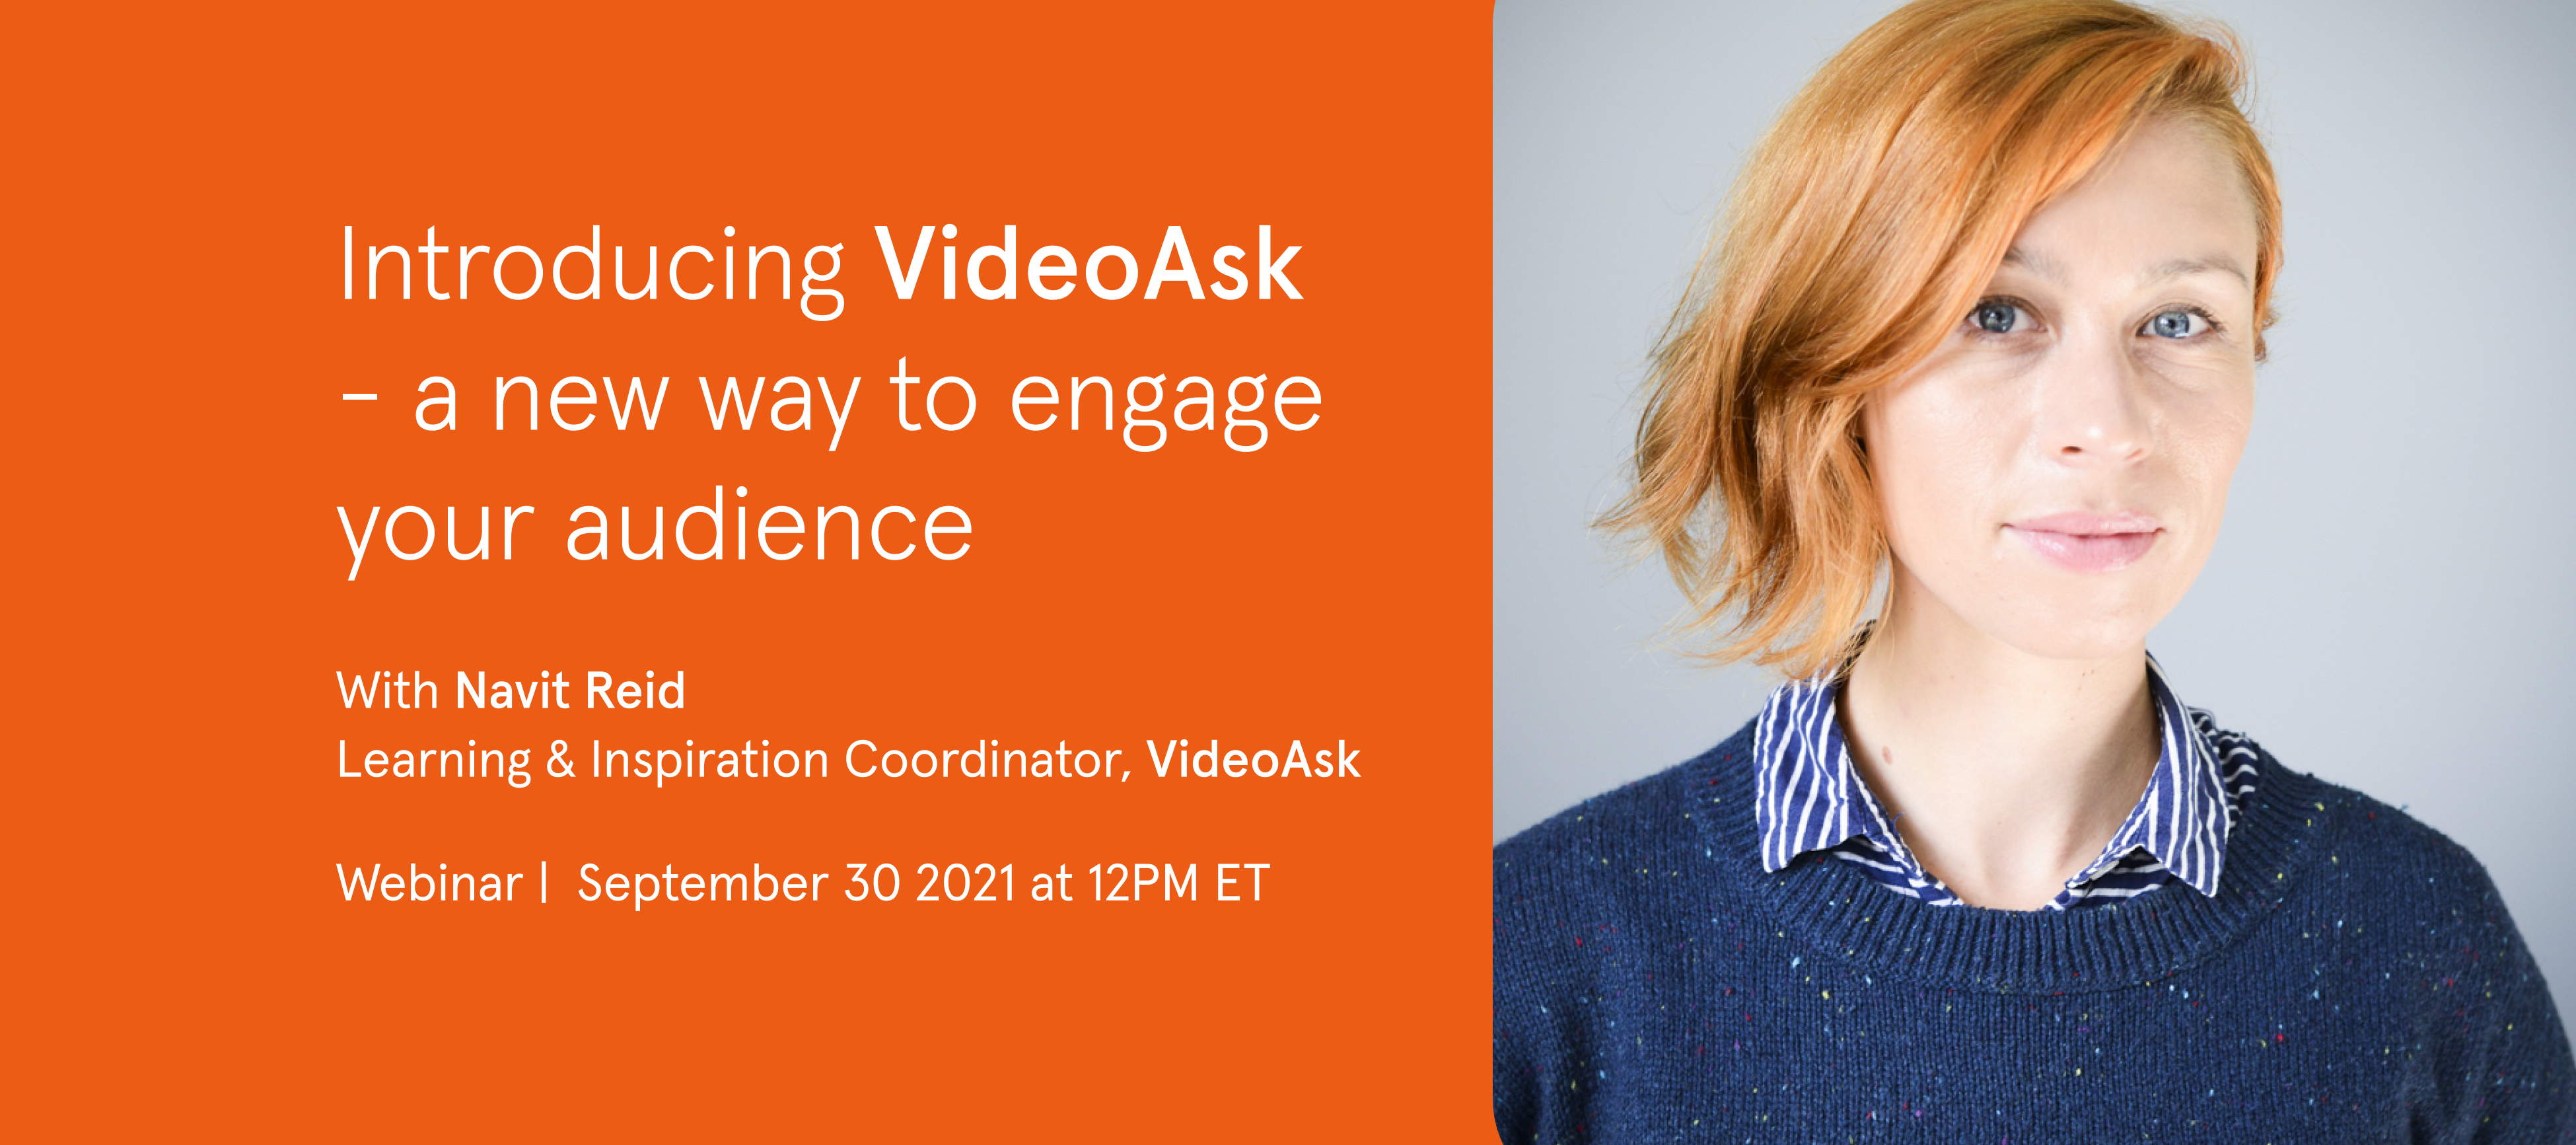 ▶️ Rewatch the Webinar: Introducing VideoAsk – a new way to engage your audience